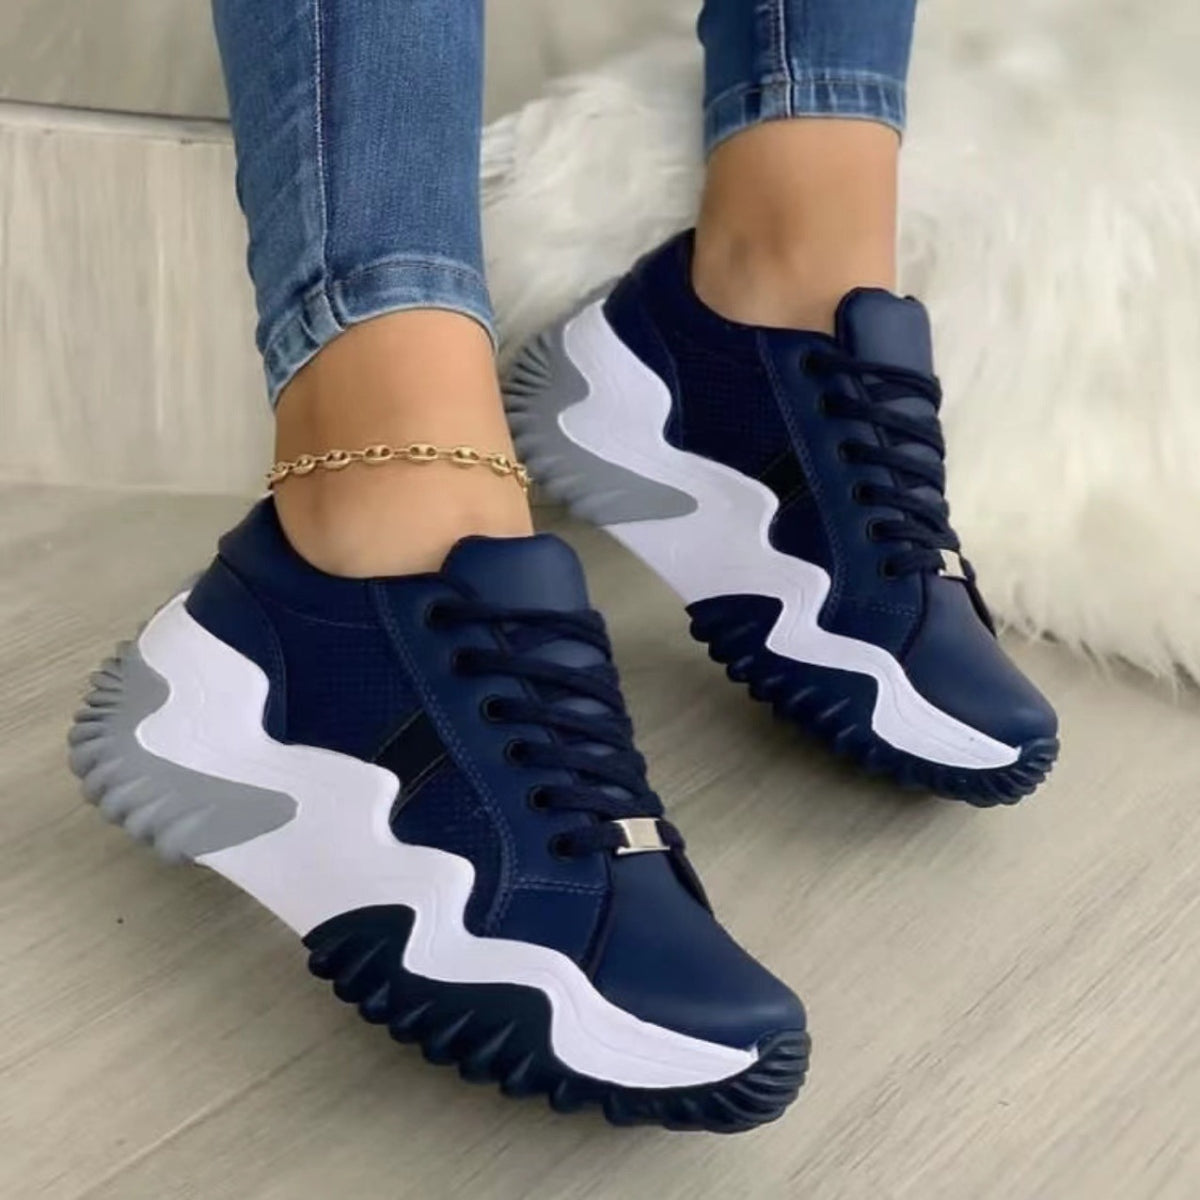 Lace Up PU Leather Platform Sneakers